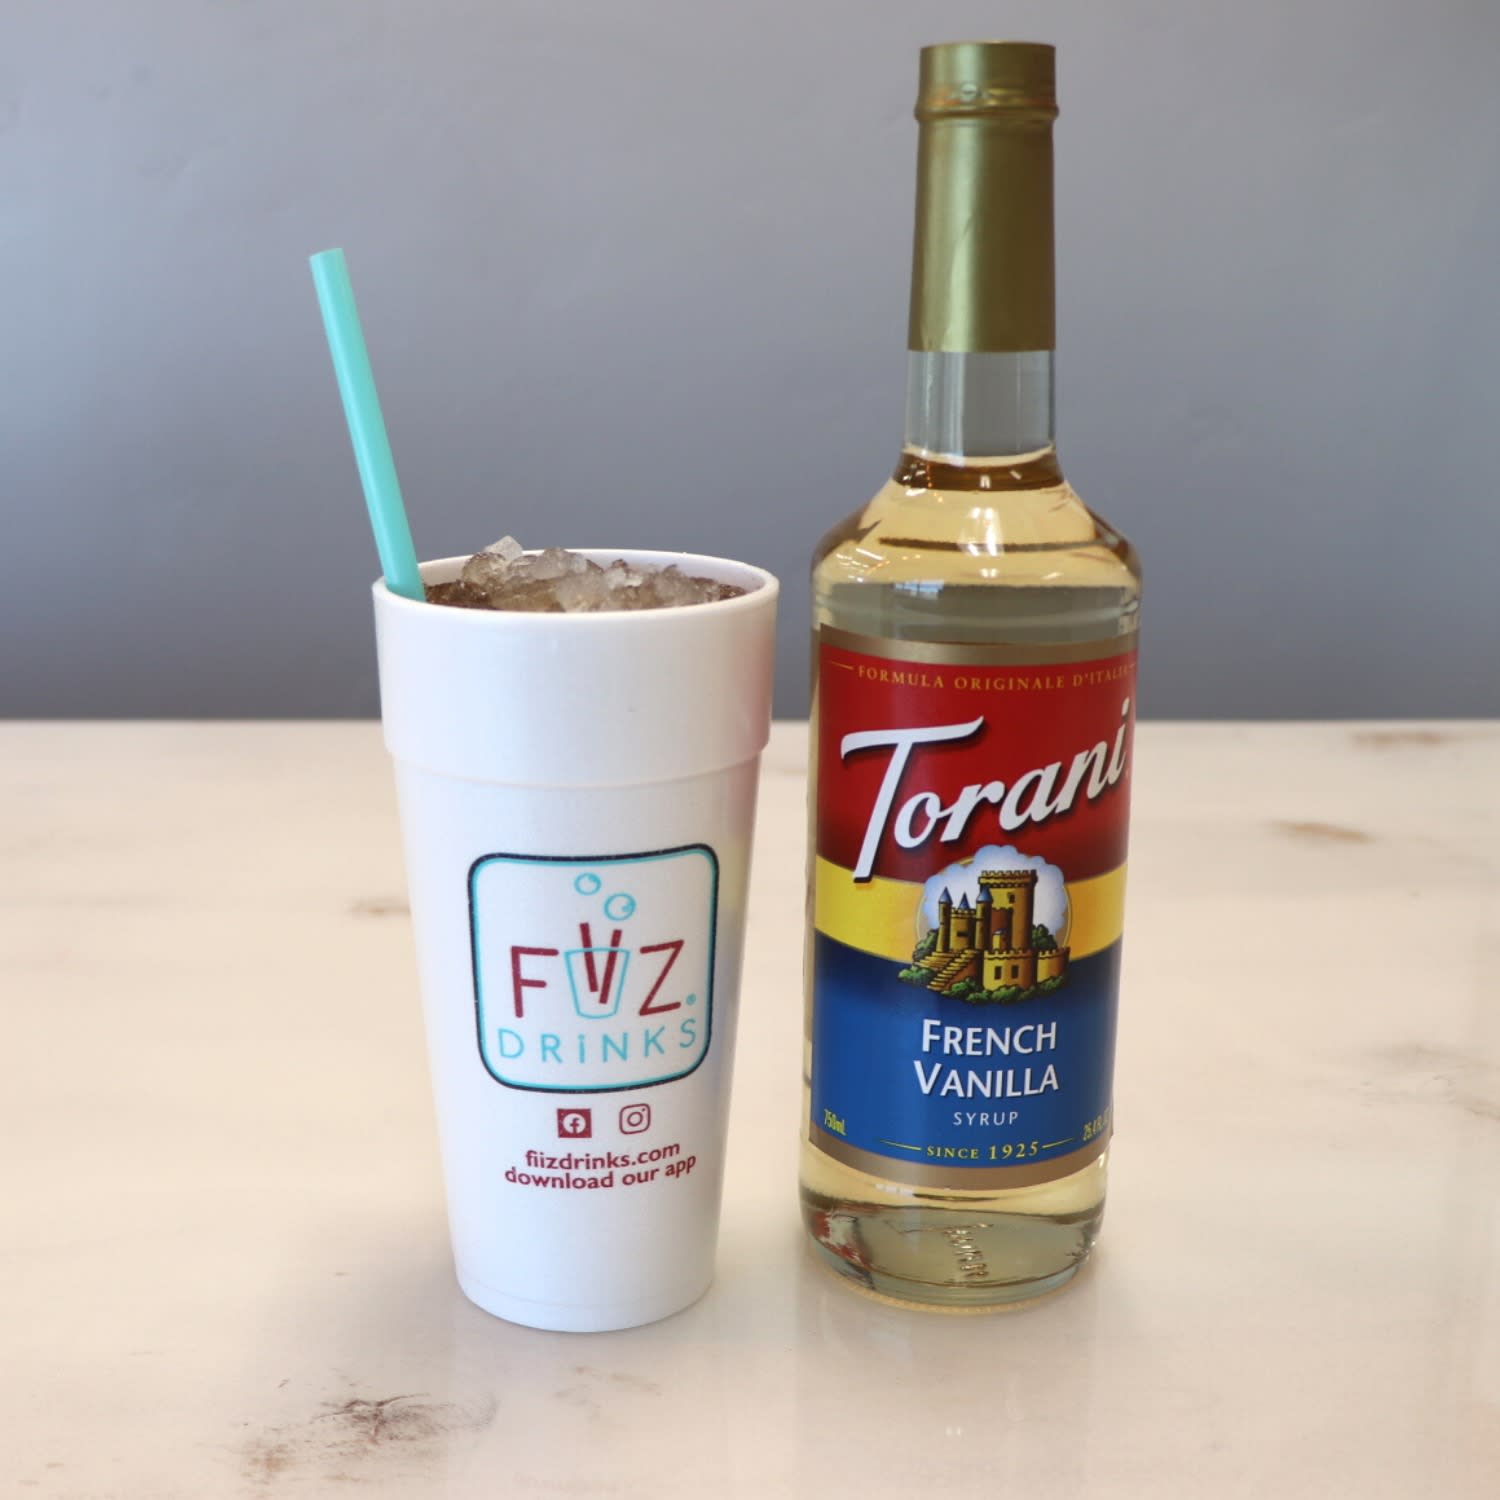 "The Frenchie" Made with Coke, Peach Puree, and French Vanilla